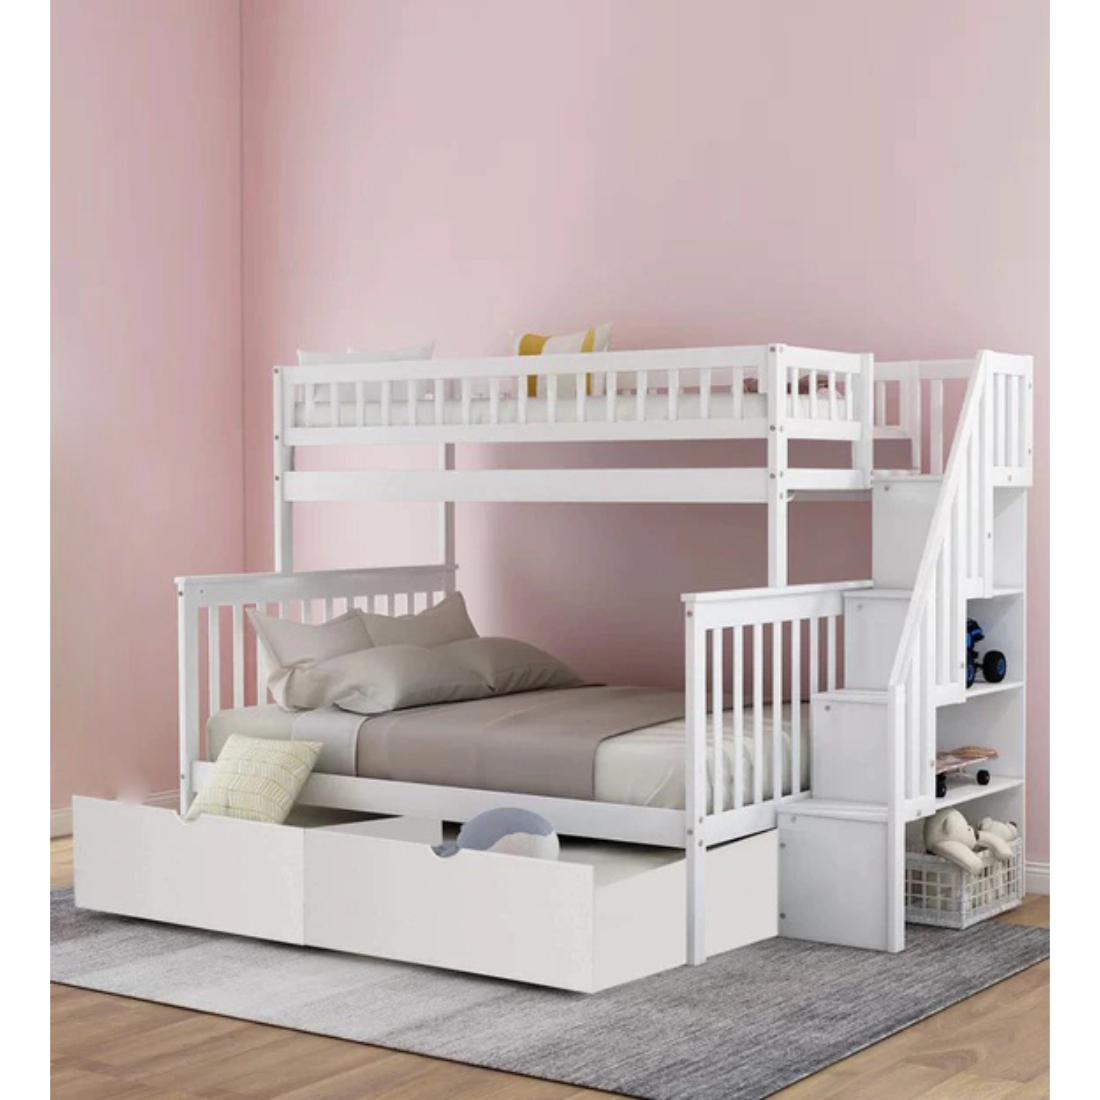 Advik Solid Wood Bunk Bed With, Wooden Bunk Bed With Trundle